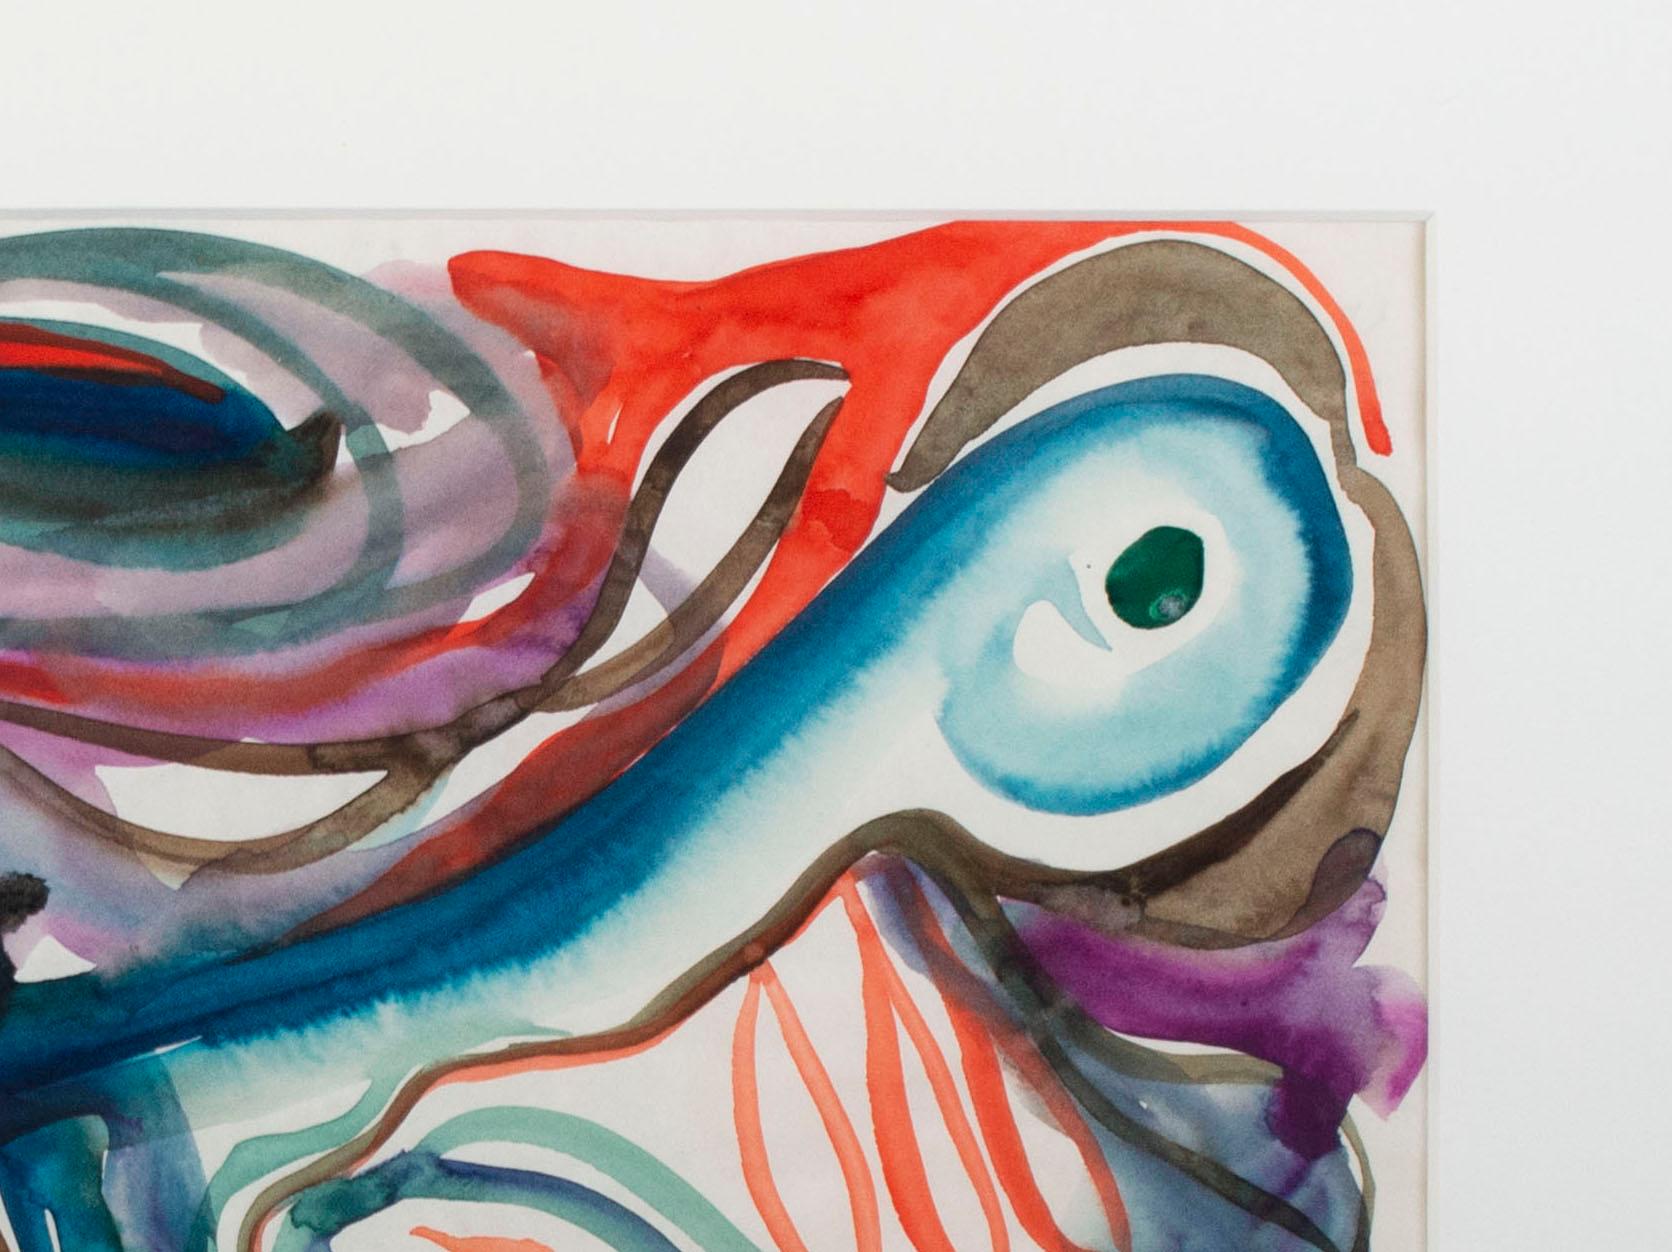 In the 1960s, Sylvia Spicuzza made several watercolor abstractions with biomorphic qualities like the one presented here. While being a playful abstraction, the watercolor also seeps into the paper resembling contemporaneous abstract expressionist